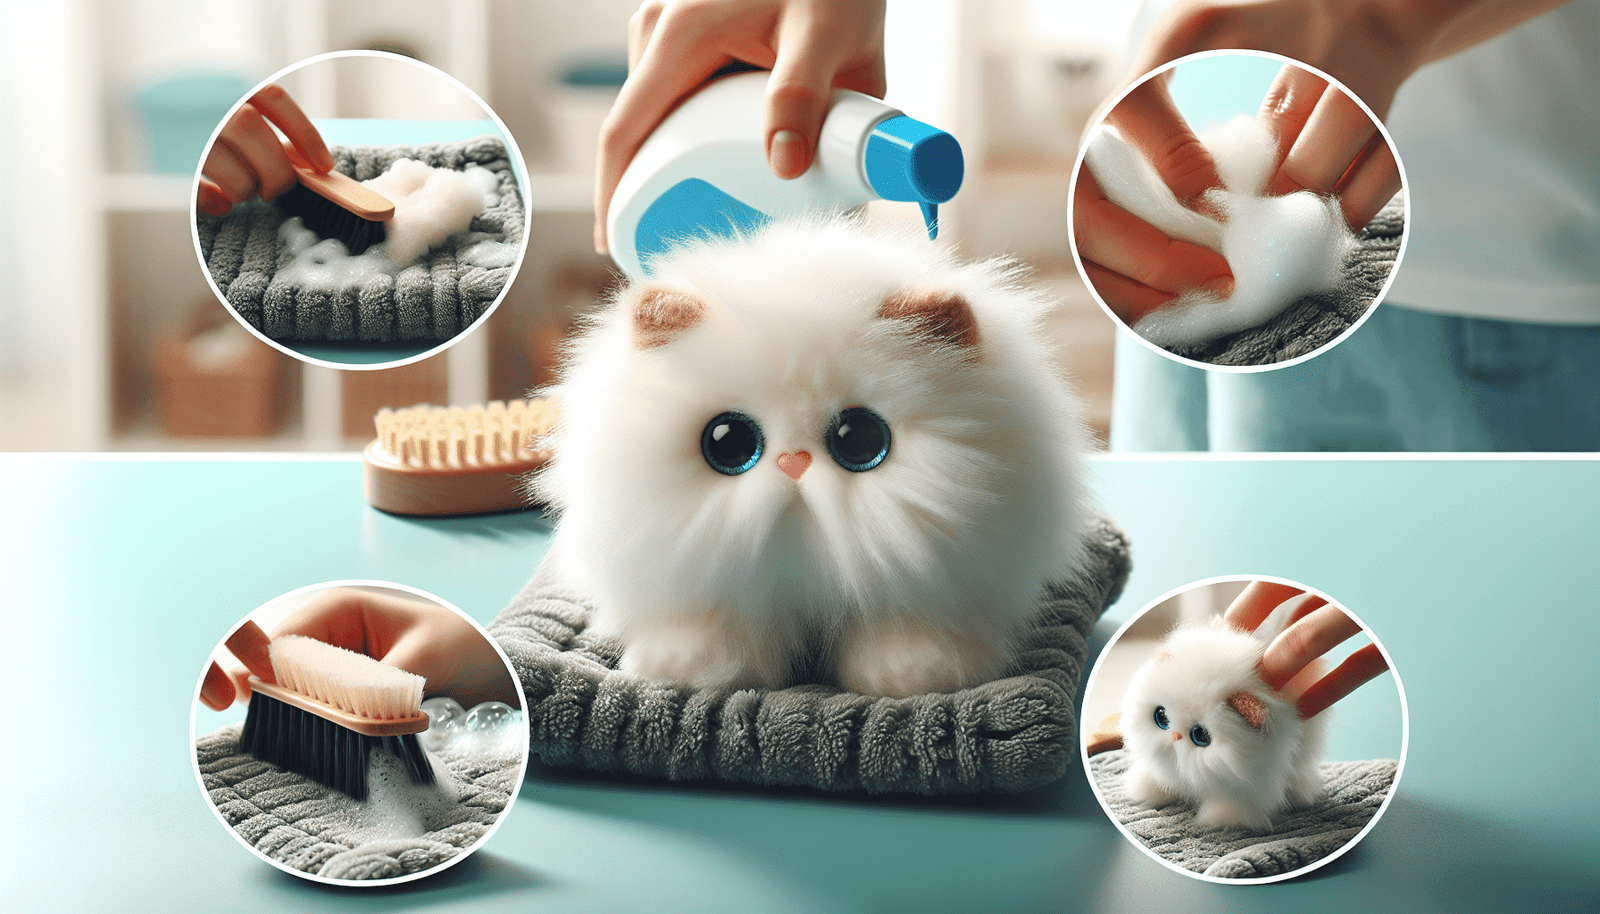 How to Clean a Persian Stuffed Cat